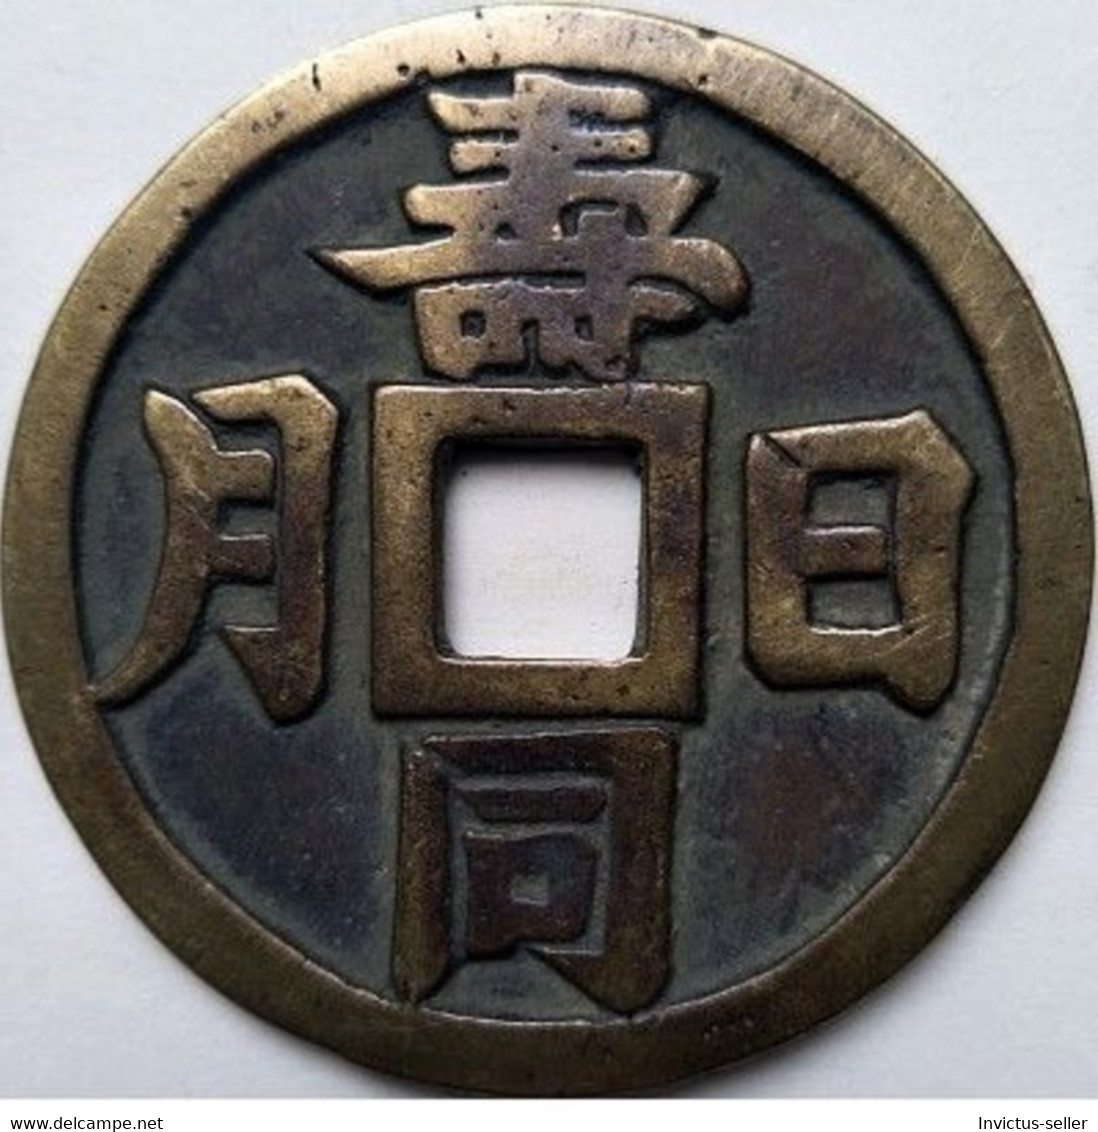 ANTICA MONETA CINESE PERIODO IMPERIALE CHINESE COINS CHINE PIÈCE CHINOISE CHINESISCHE MÜNZE COD B3 -6 - China